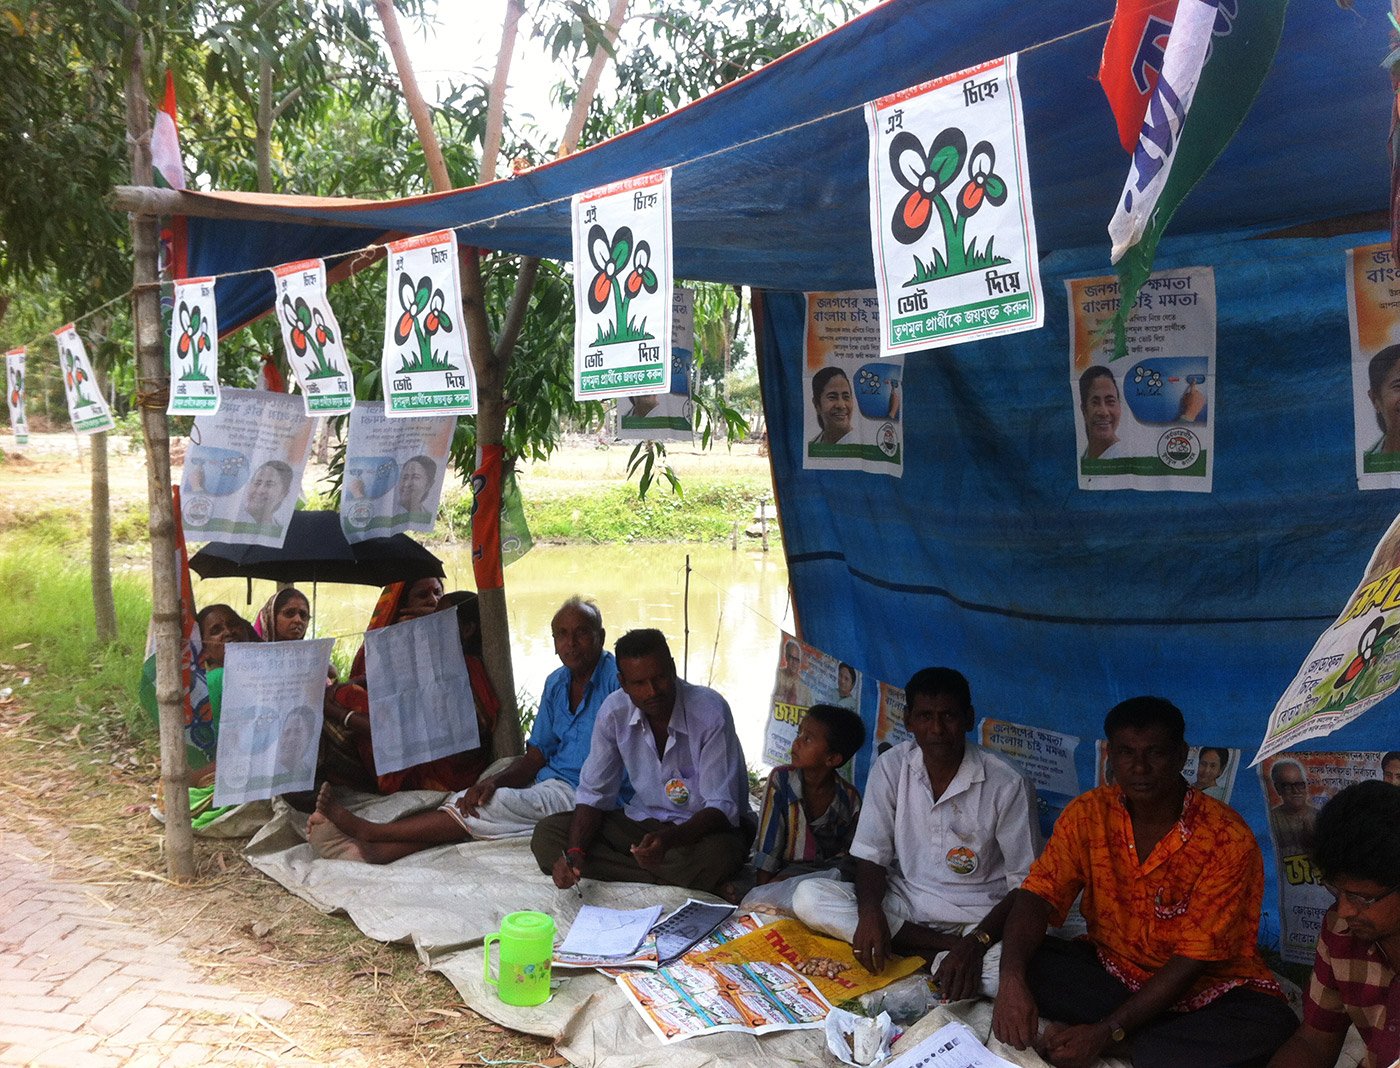 Political parties set up tents to help voters
